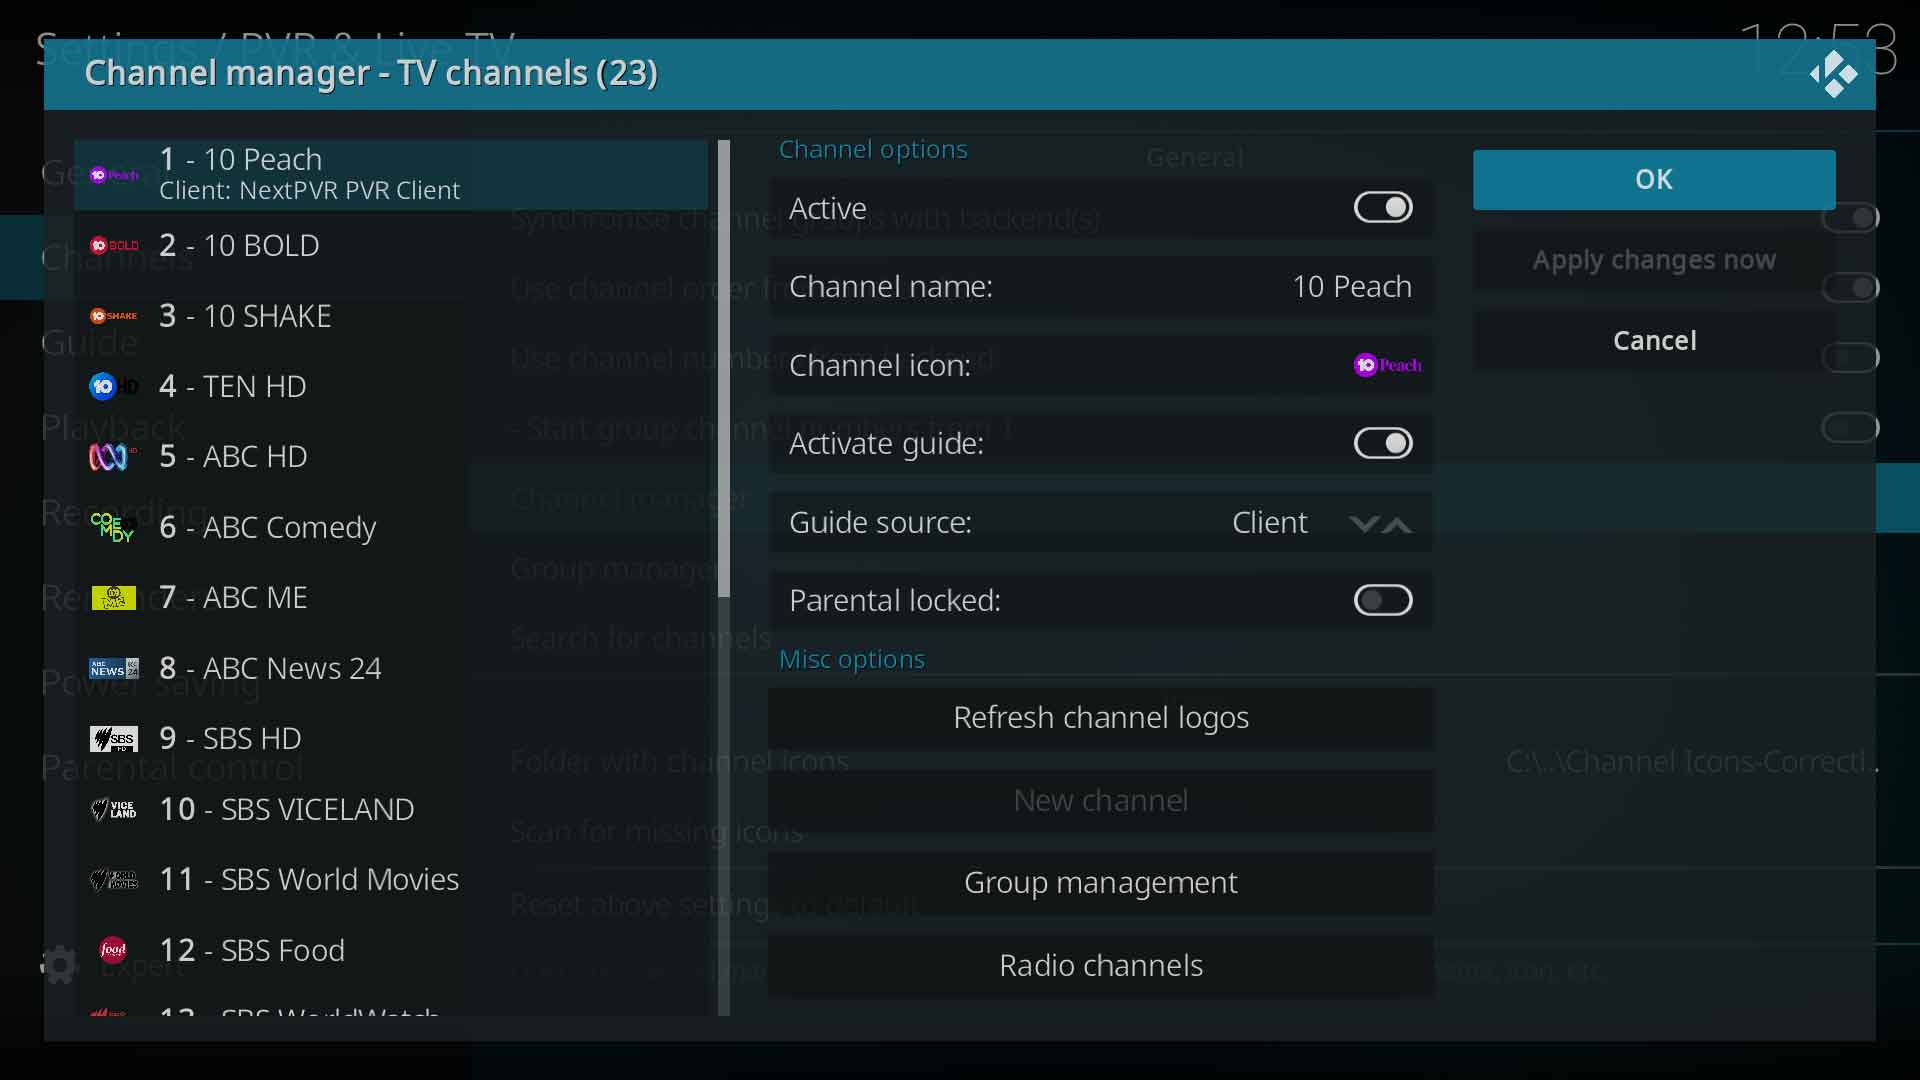 Image 3- Select Channel icon